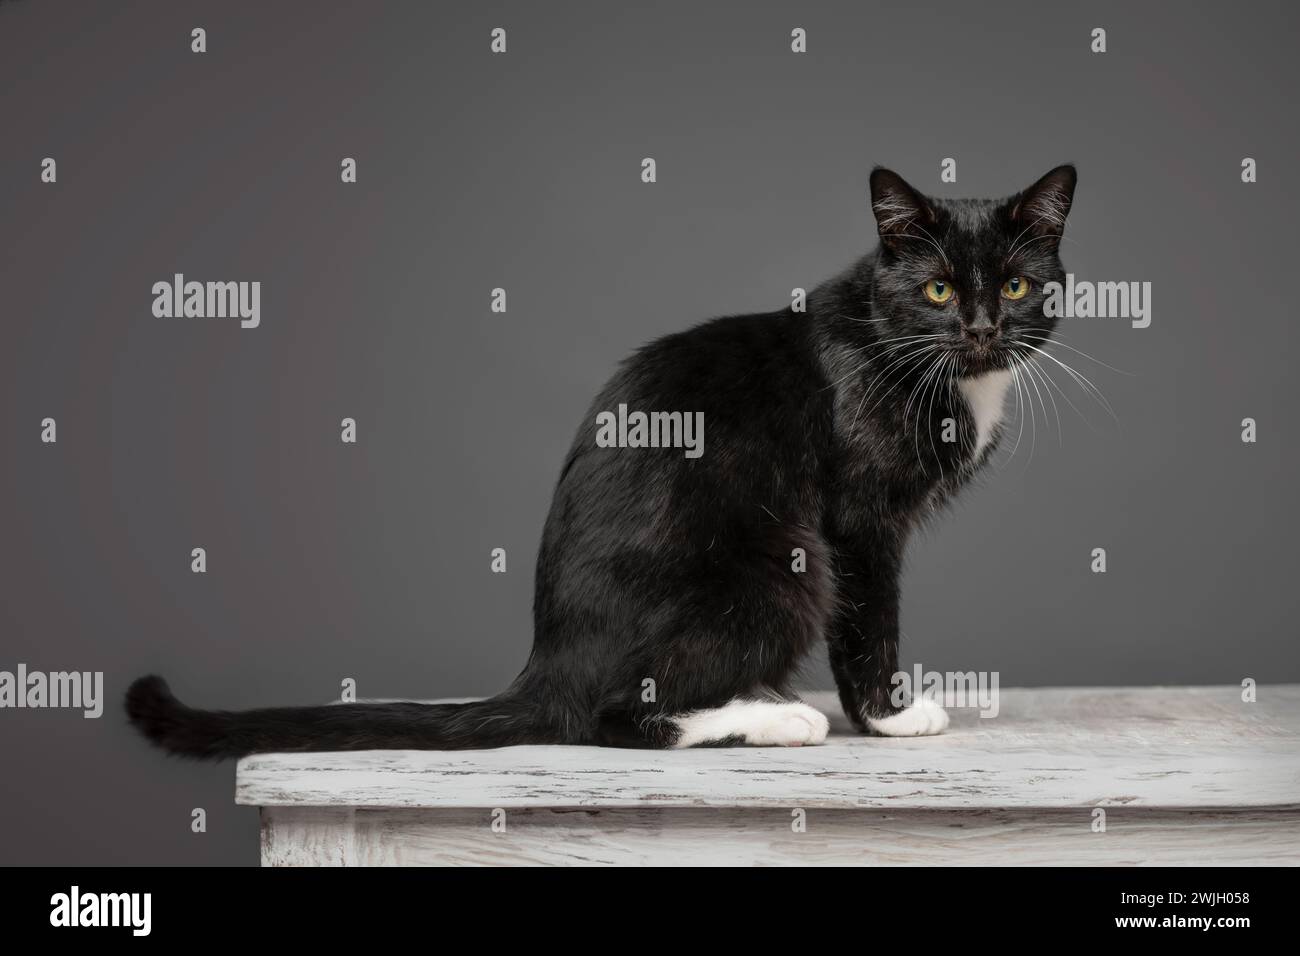 Studio shot of an adult short-haired black and white cat looking at the camera, sitting on a whitewashed table seen against a grey background. Stock Photo